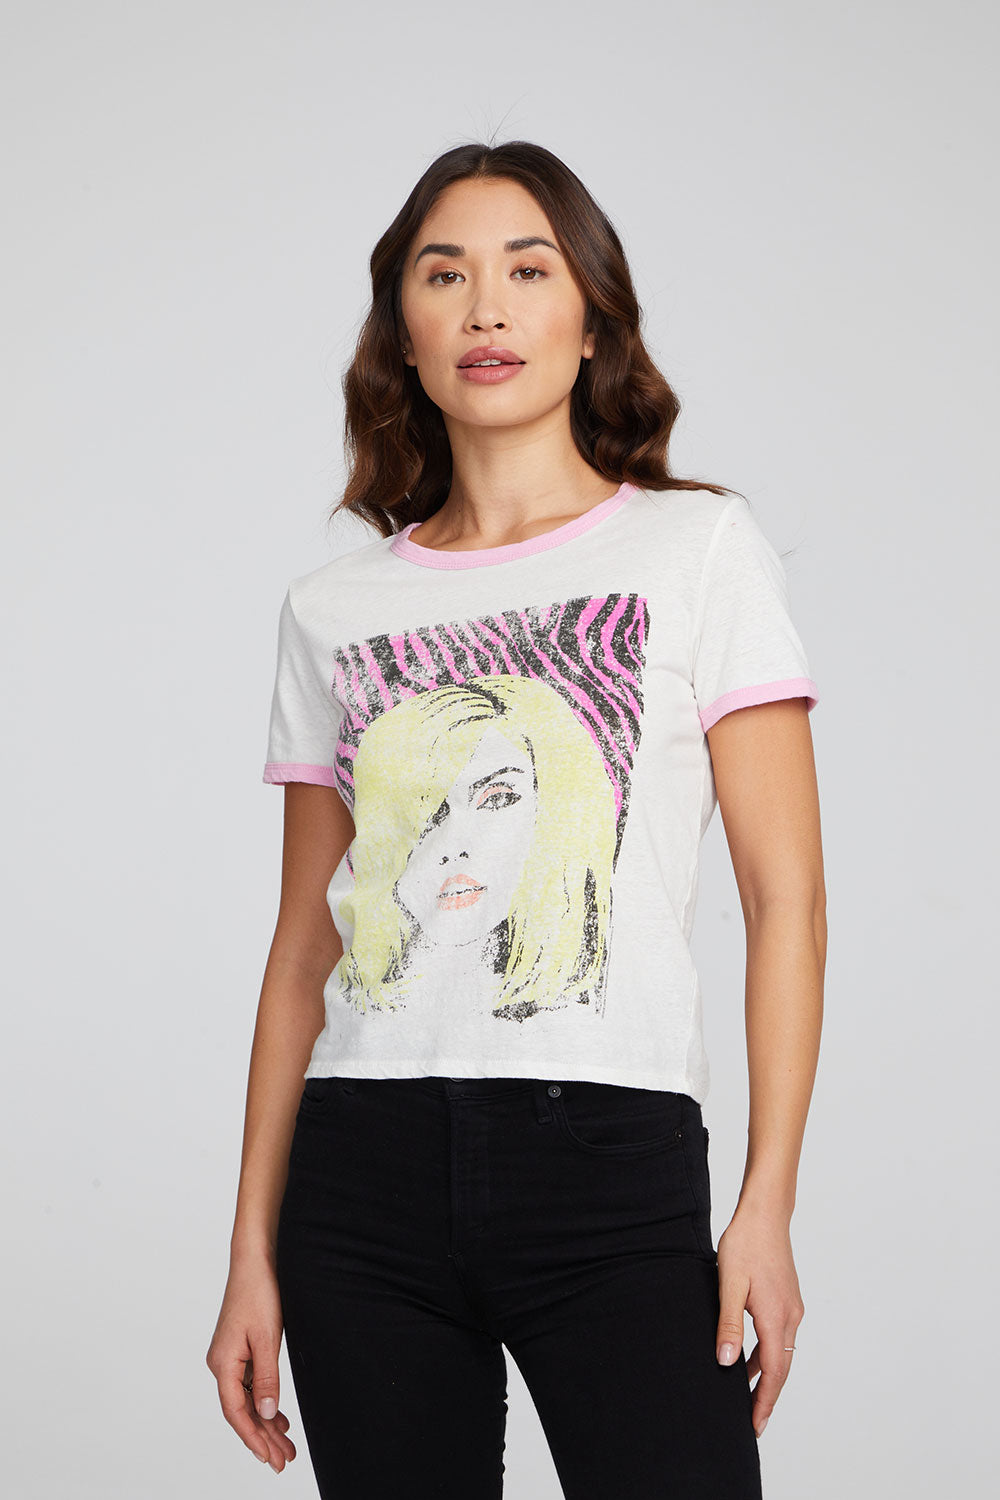 Blondie Punk Poster Ringer Tee WOMENS chaserbrand